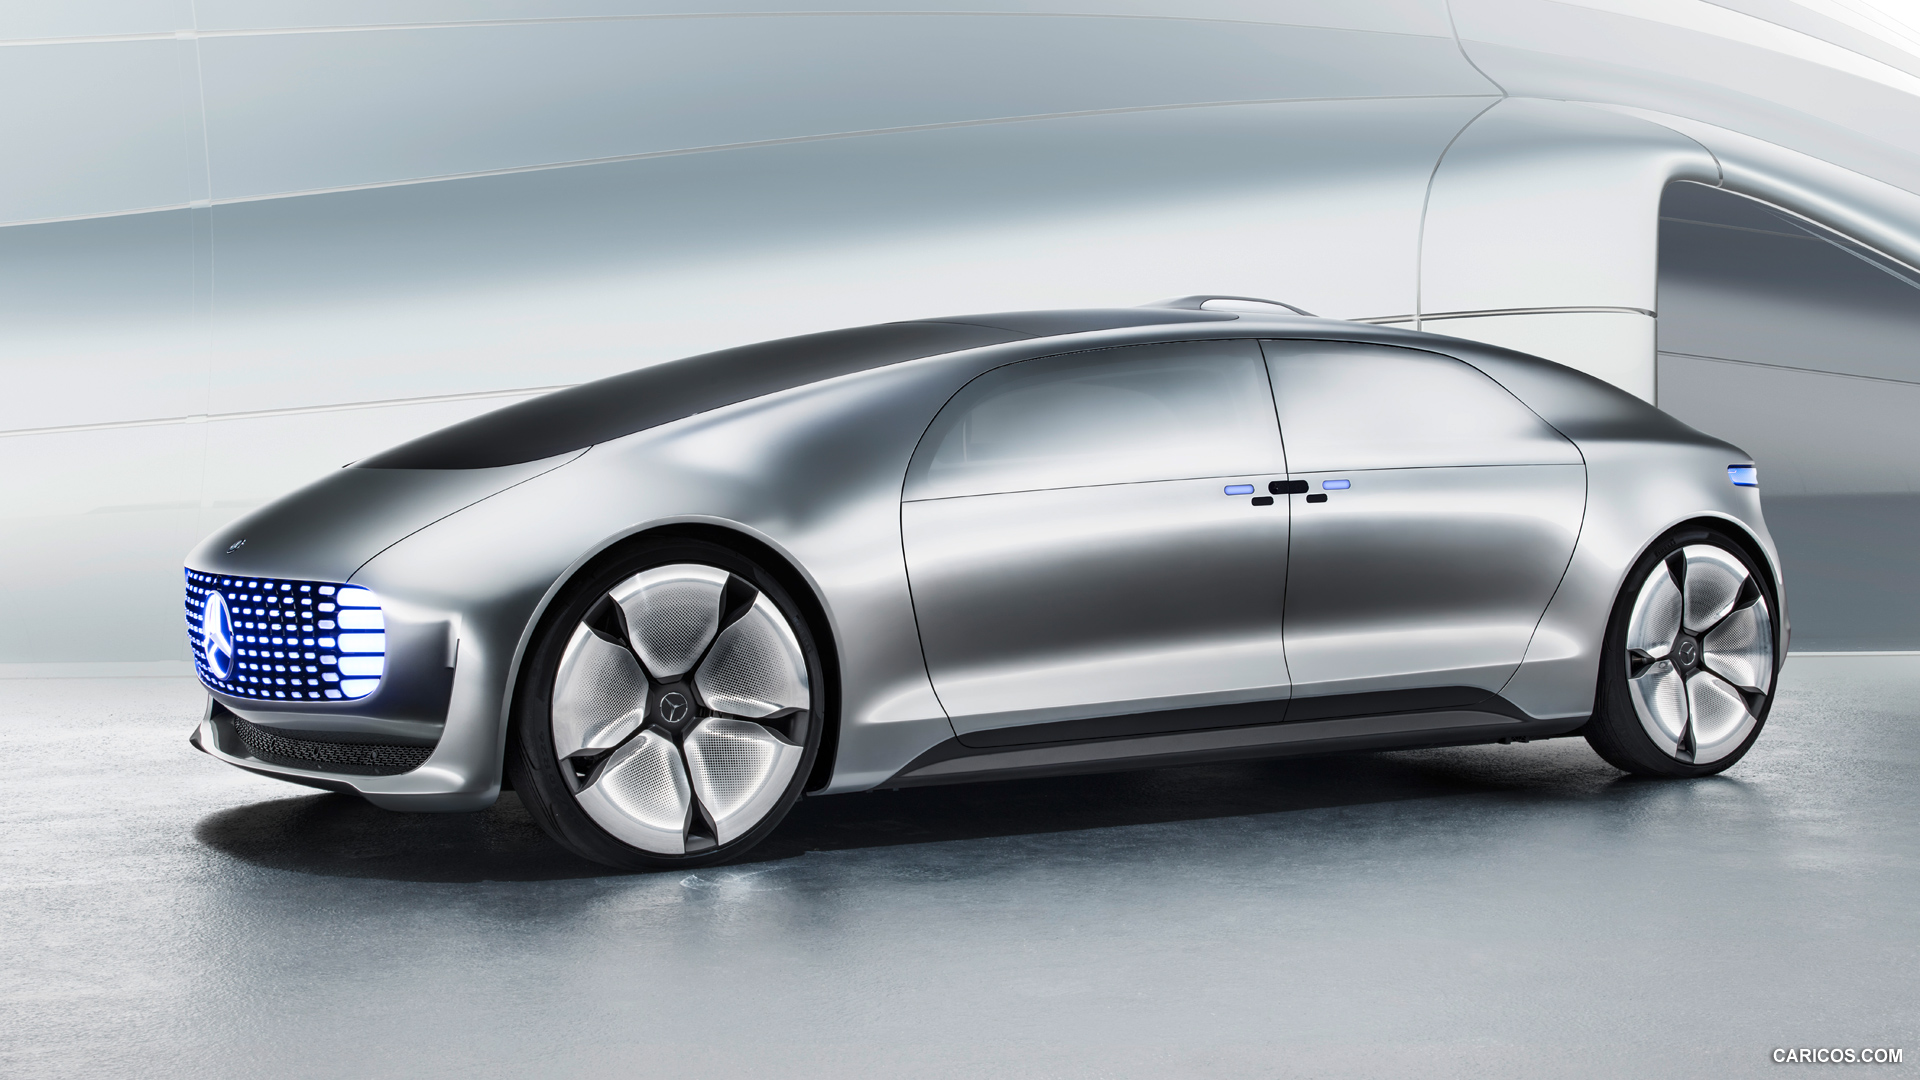 2015 Mercedes-Benz F 015 Luxury in Motion Concept  - Side, #64 of 92